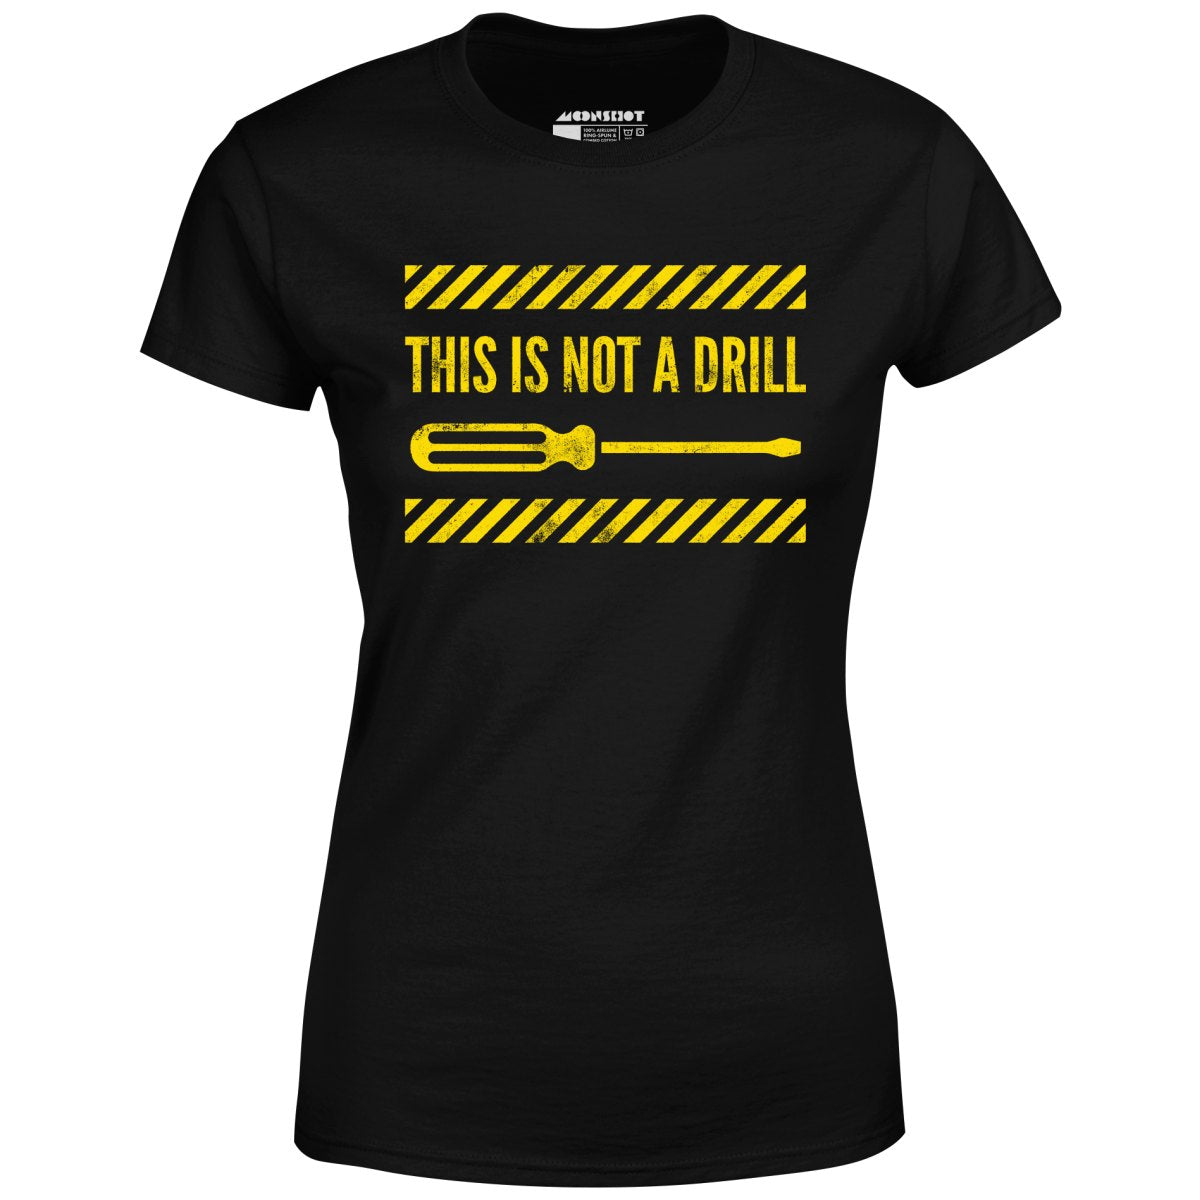 This is Not a Drill - Women's T-Shirt